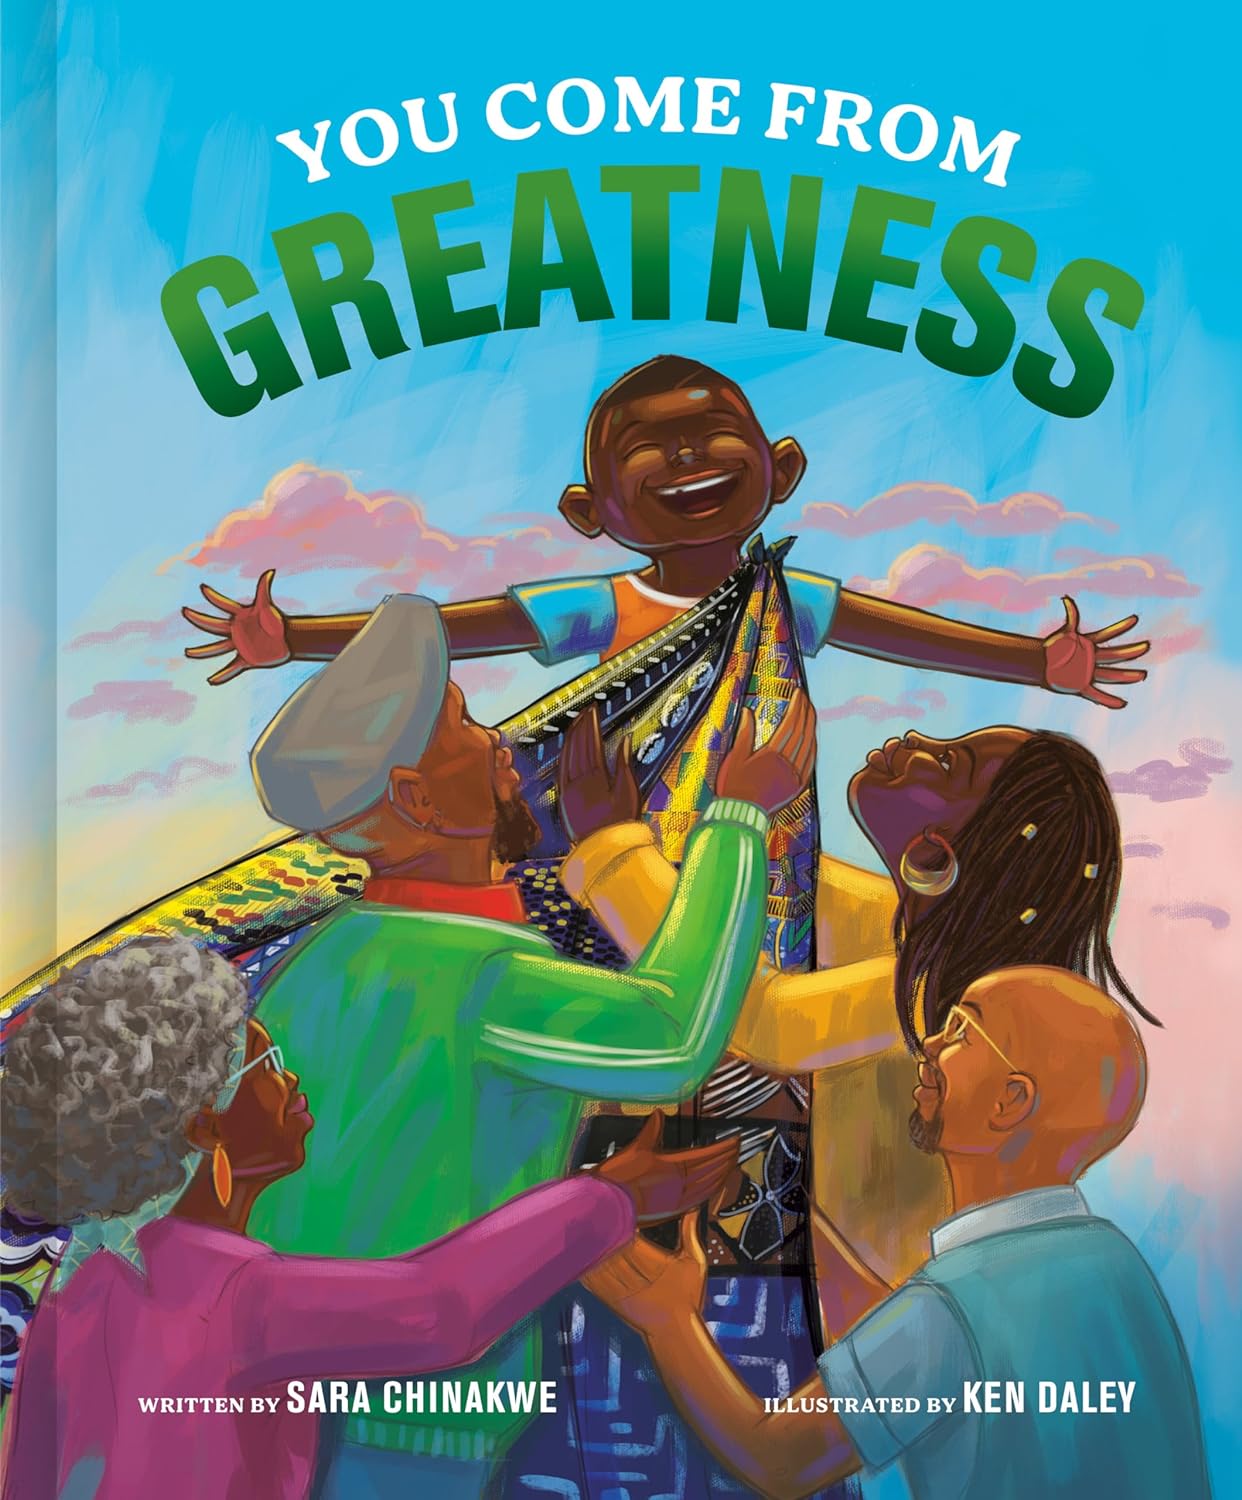 Image for "You Come from Greatness"